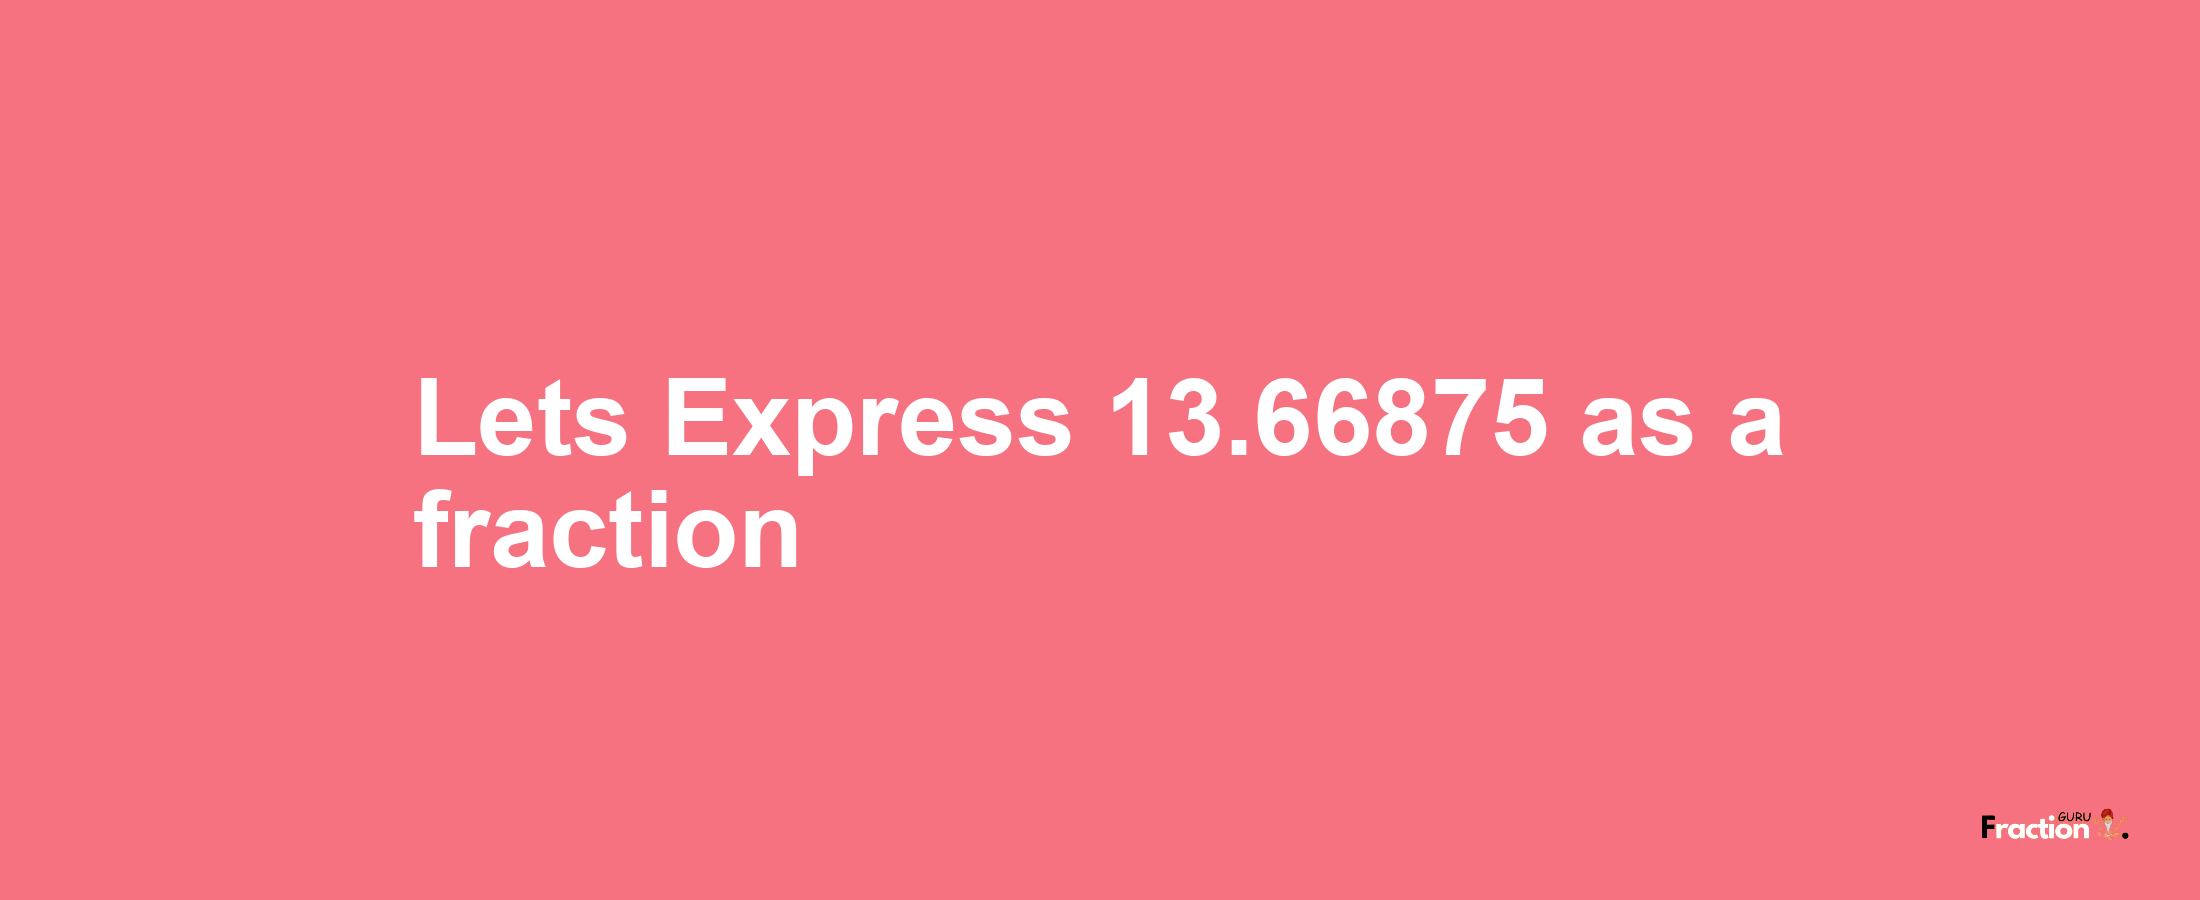 Lets Express 13.66875 as afraction